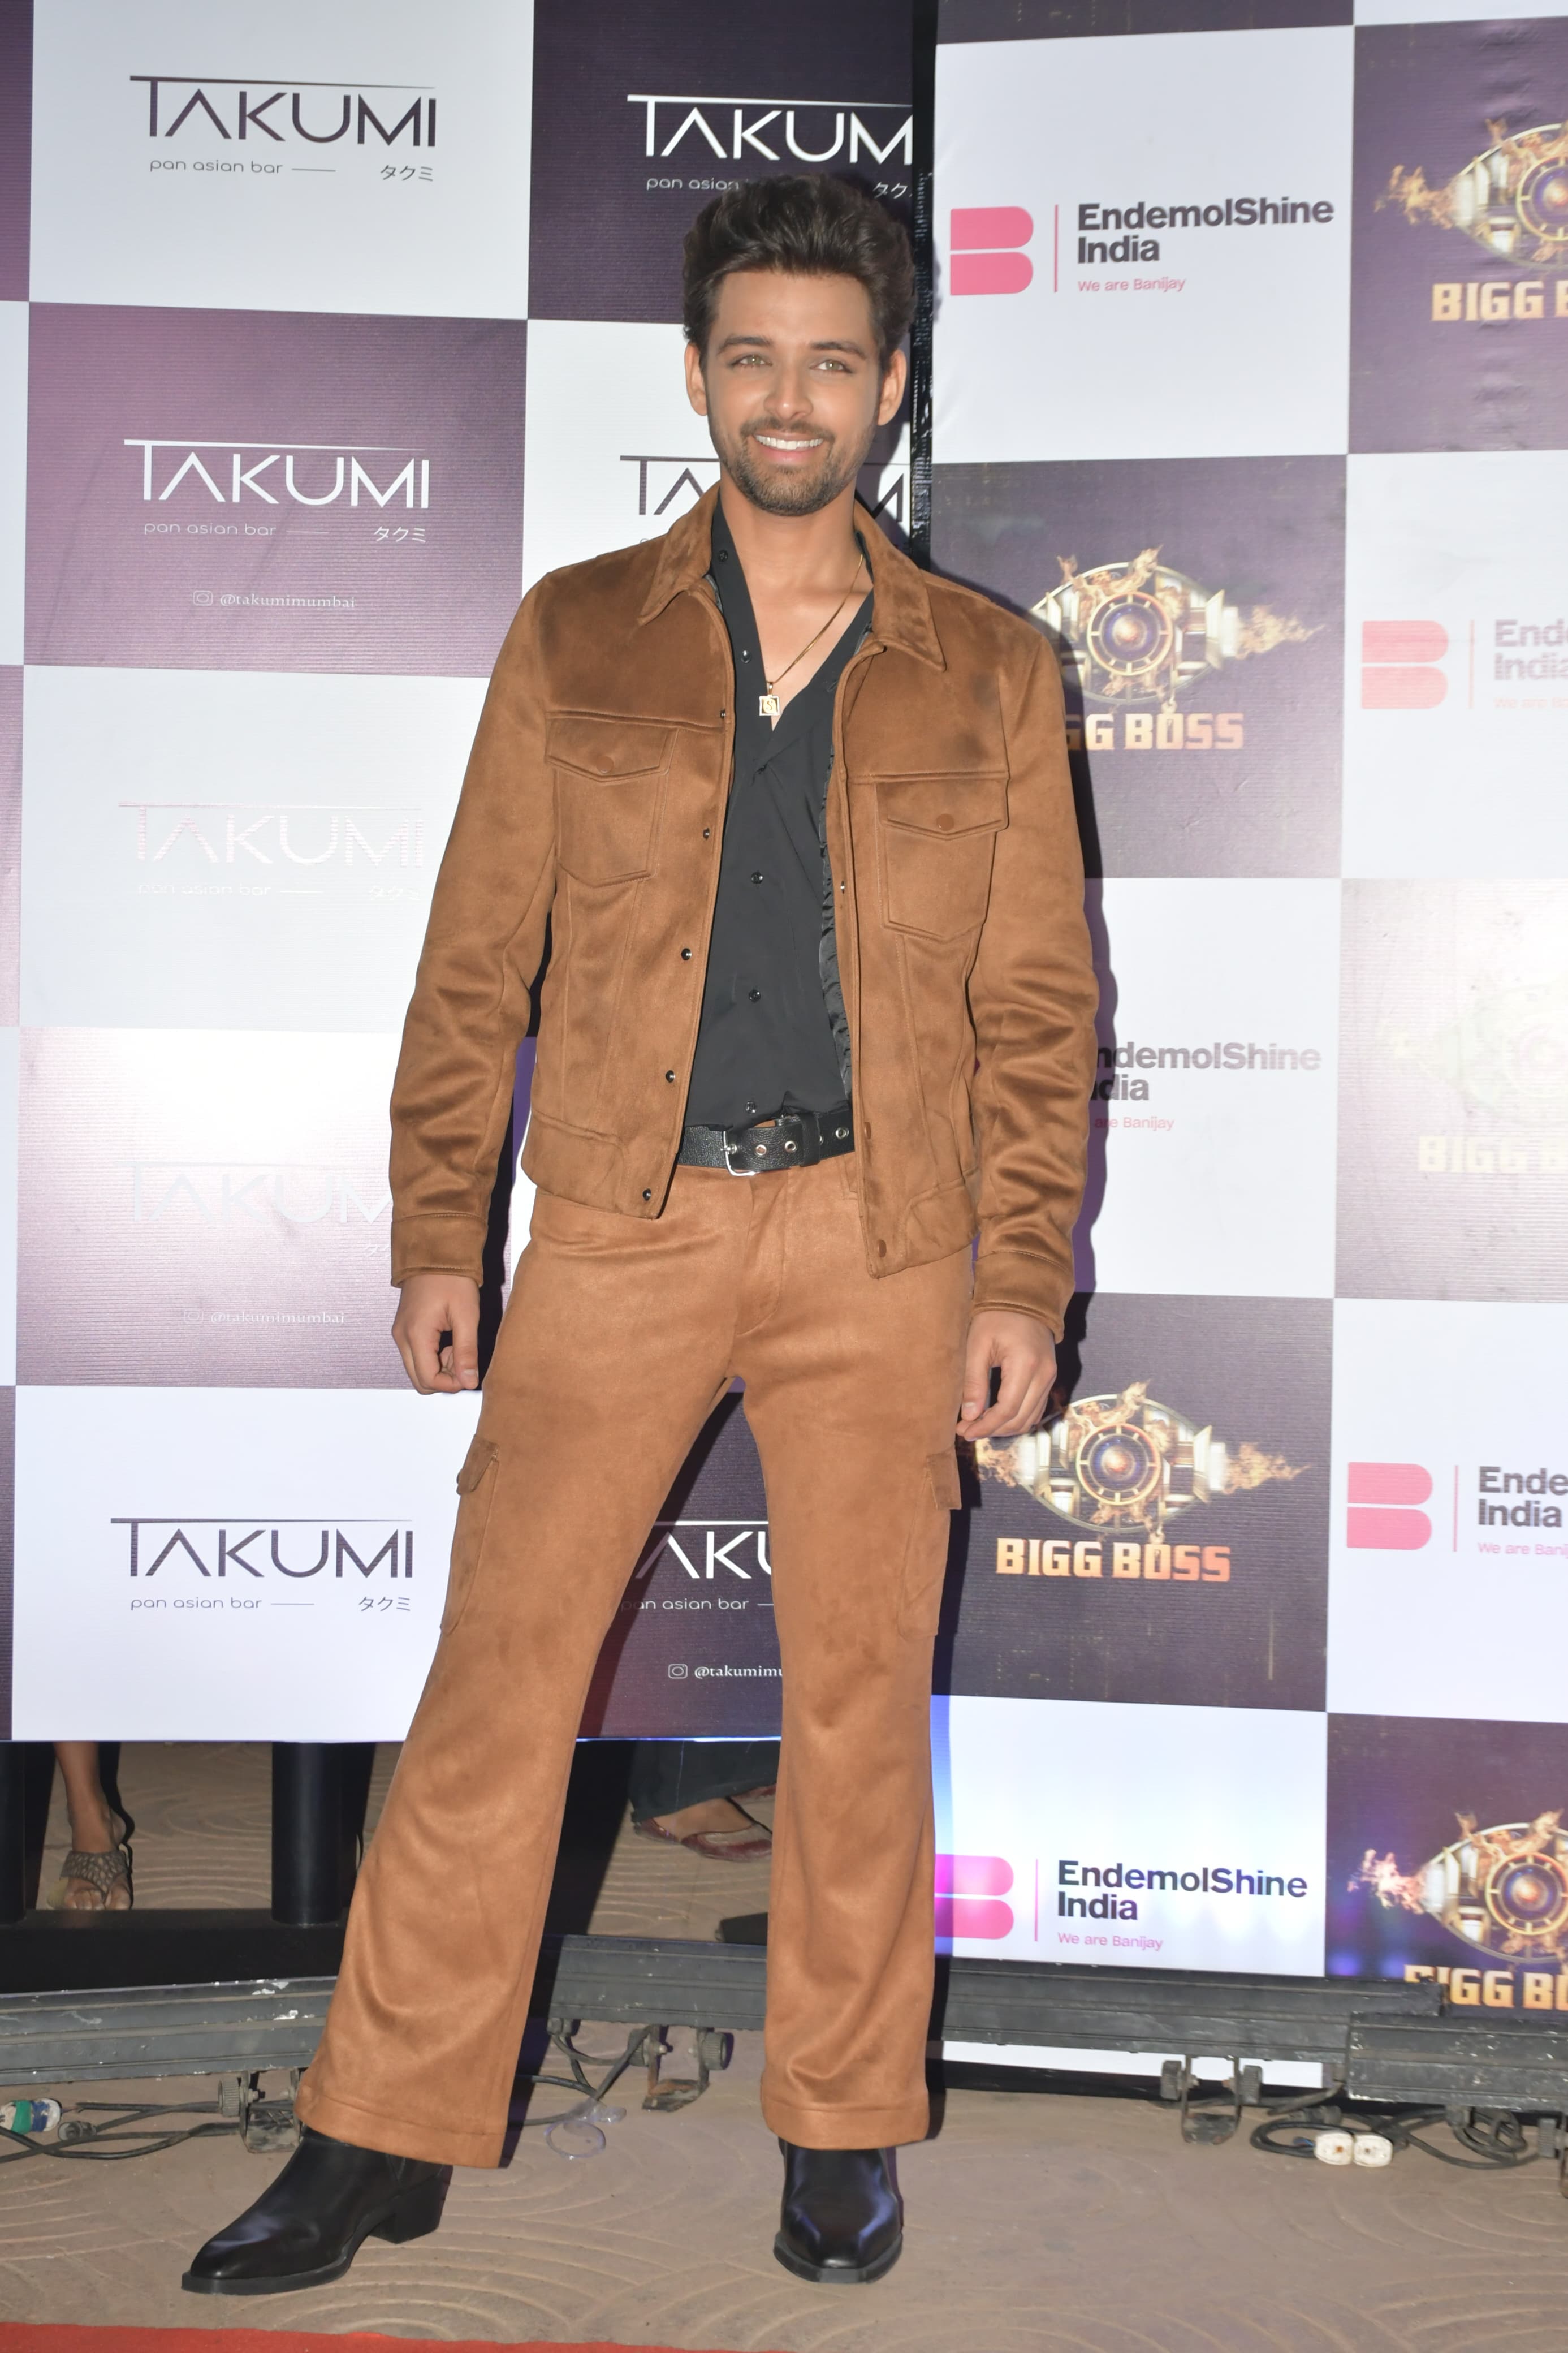 The handsome hunk, Samart Jurel, appeared in complete brown attire as he graced the red carpet with his appearance